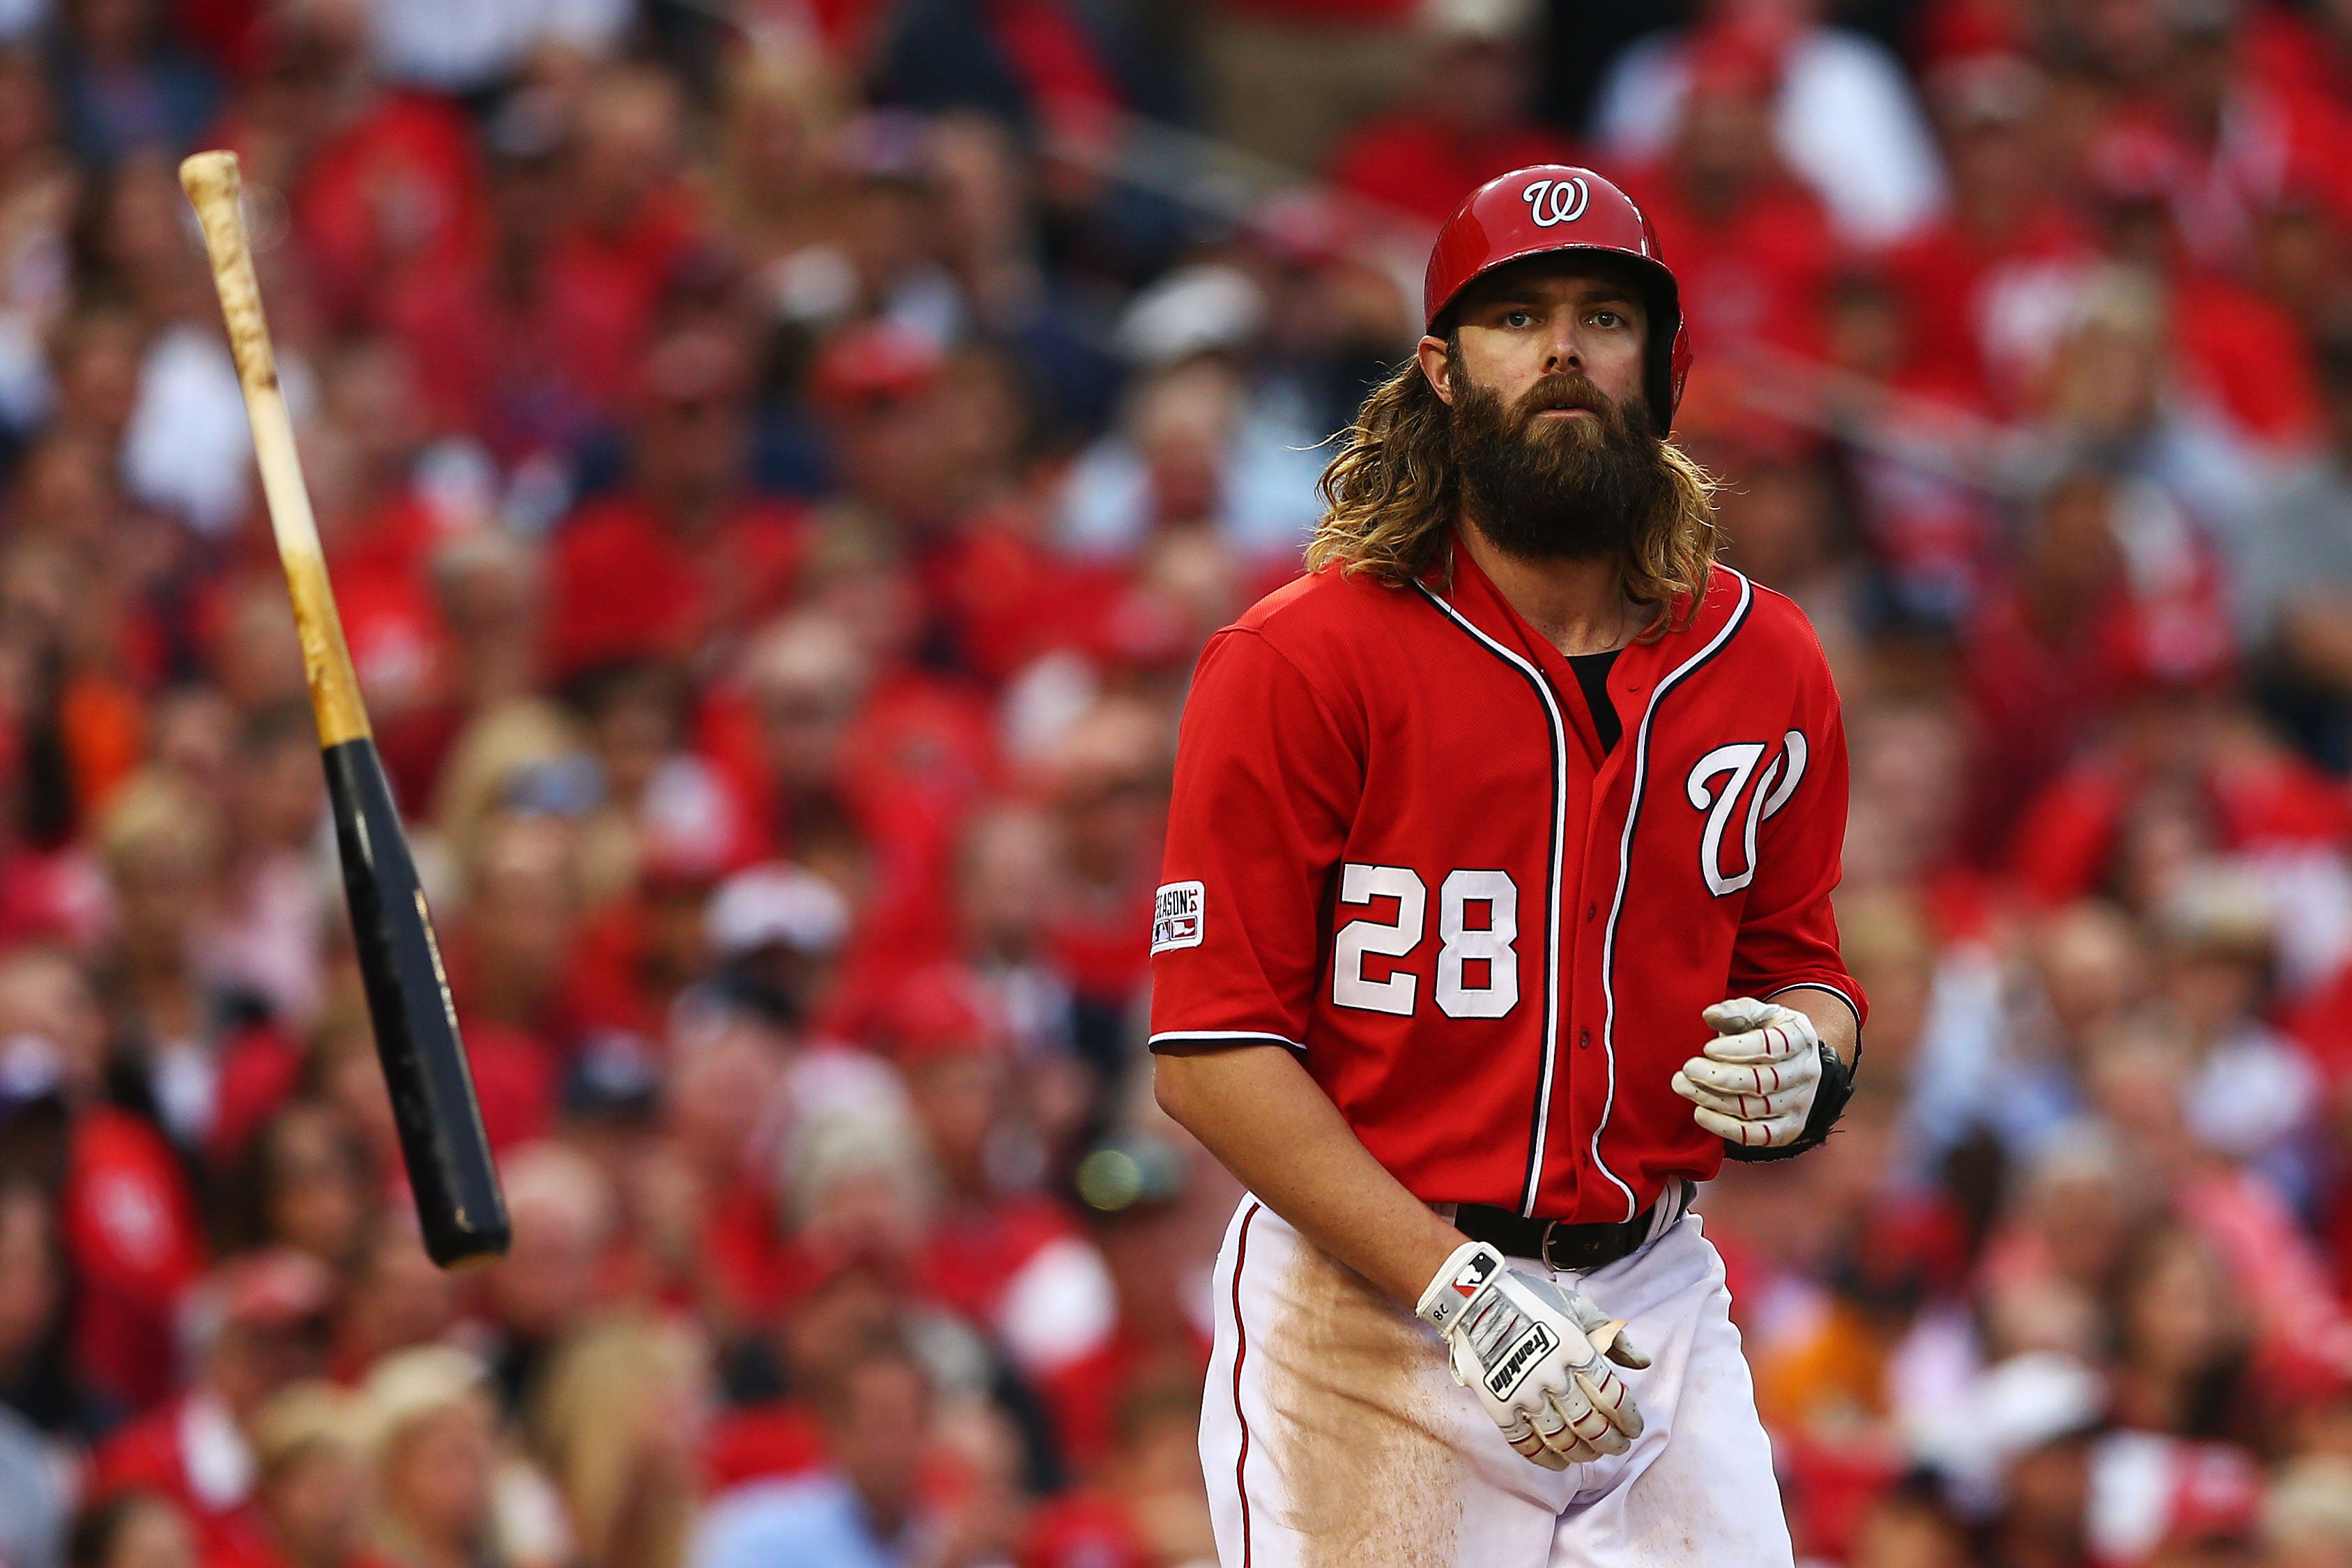 Nationals’ Jayson Werth Hasn’t Made Progress in Injury Recovery